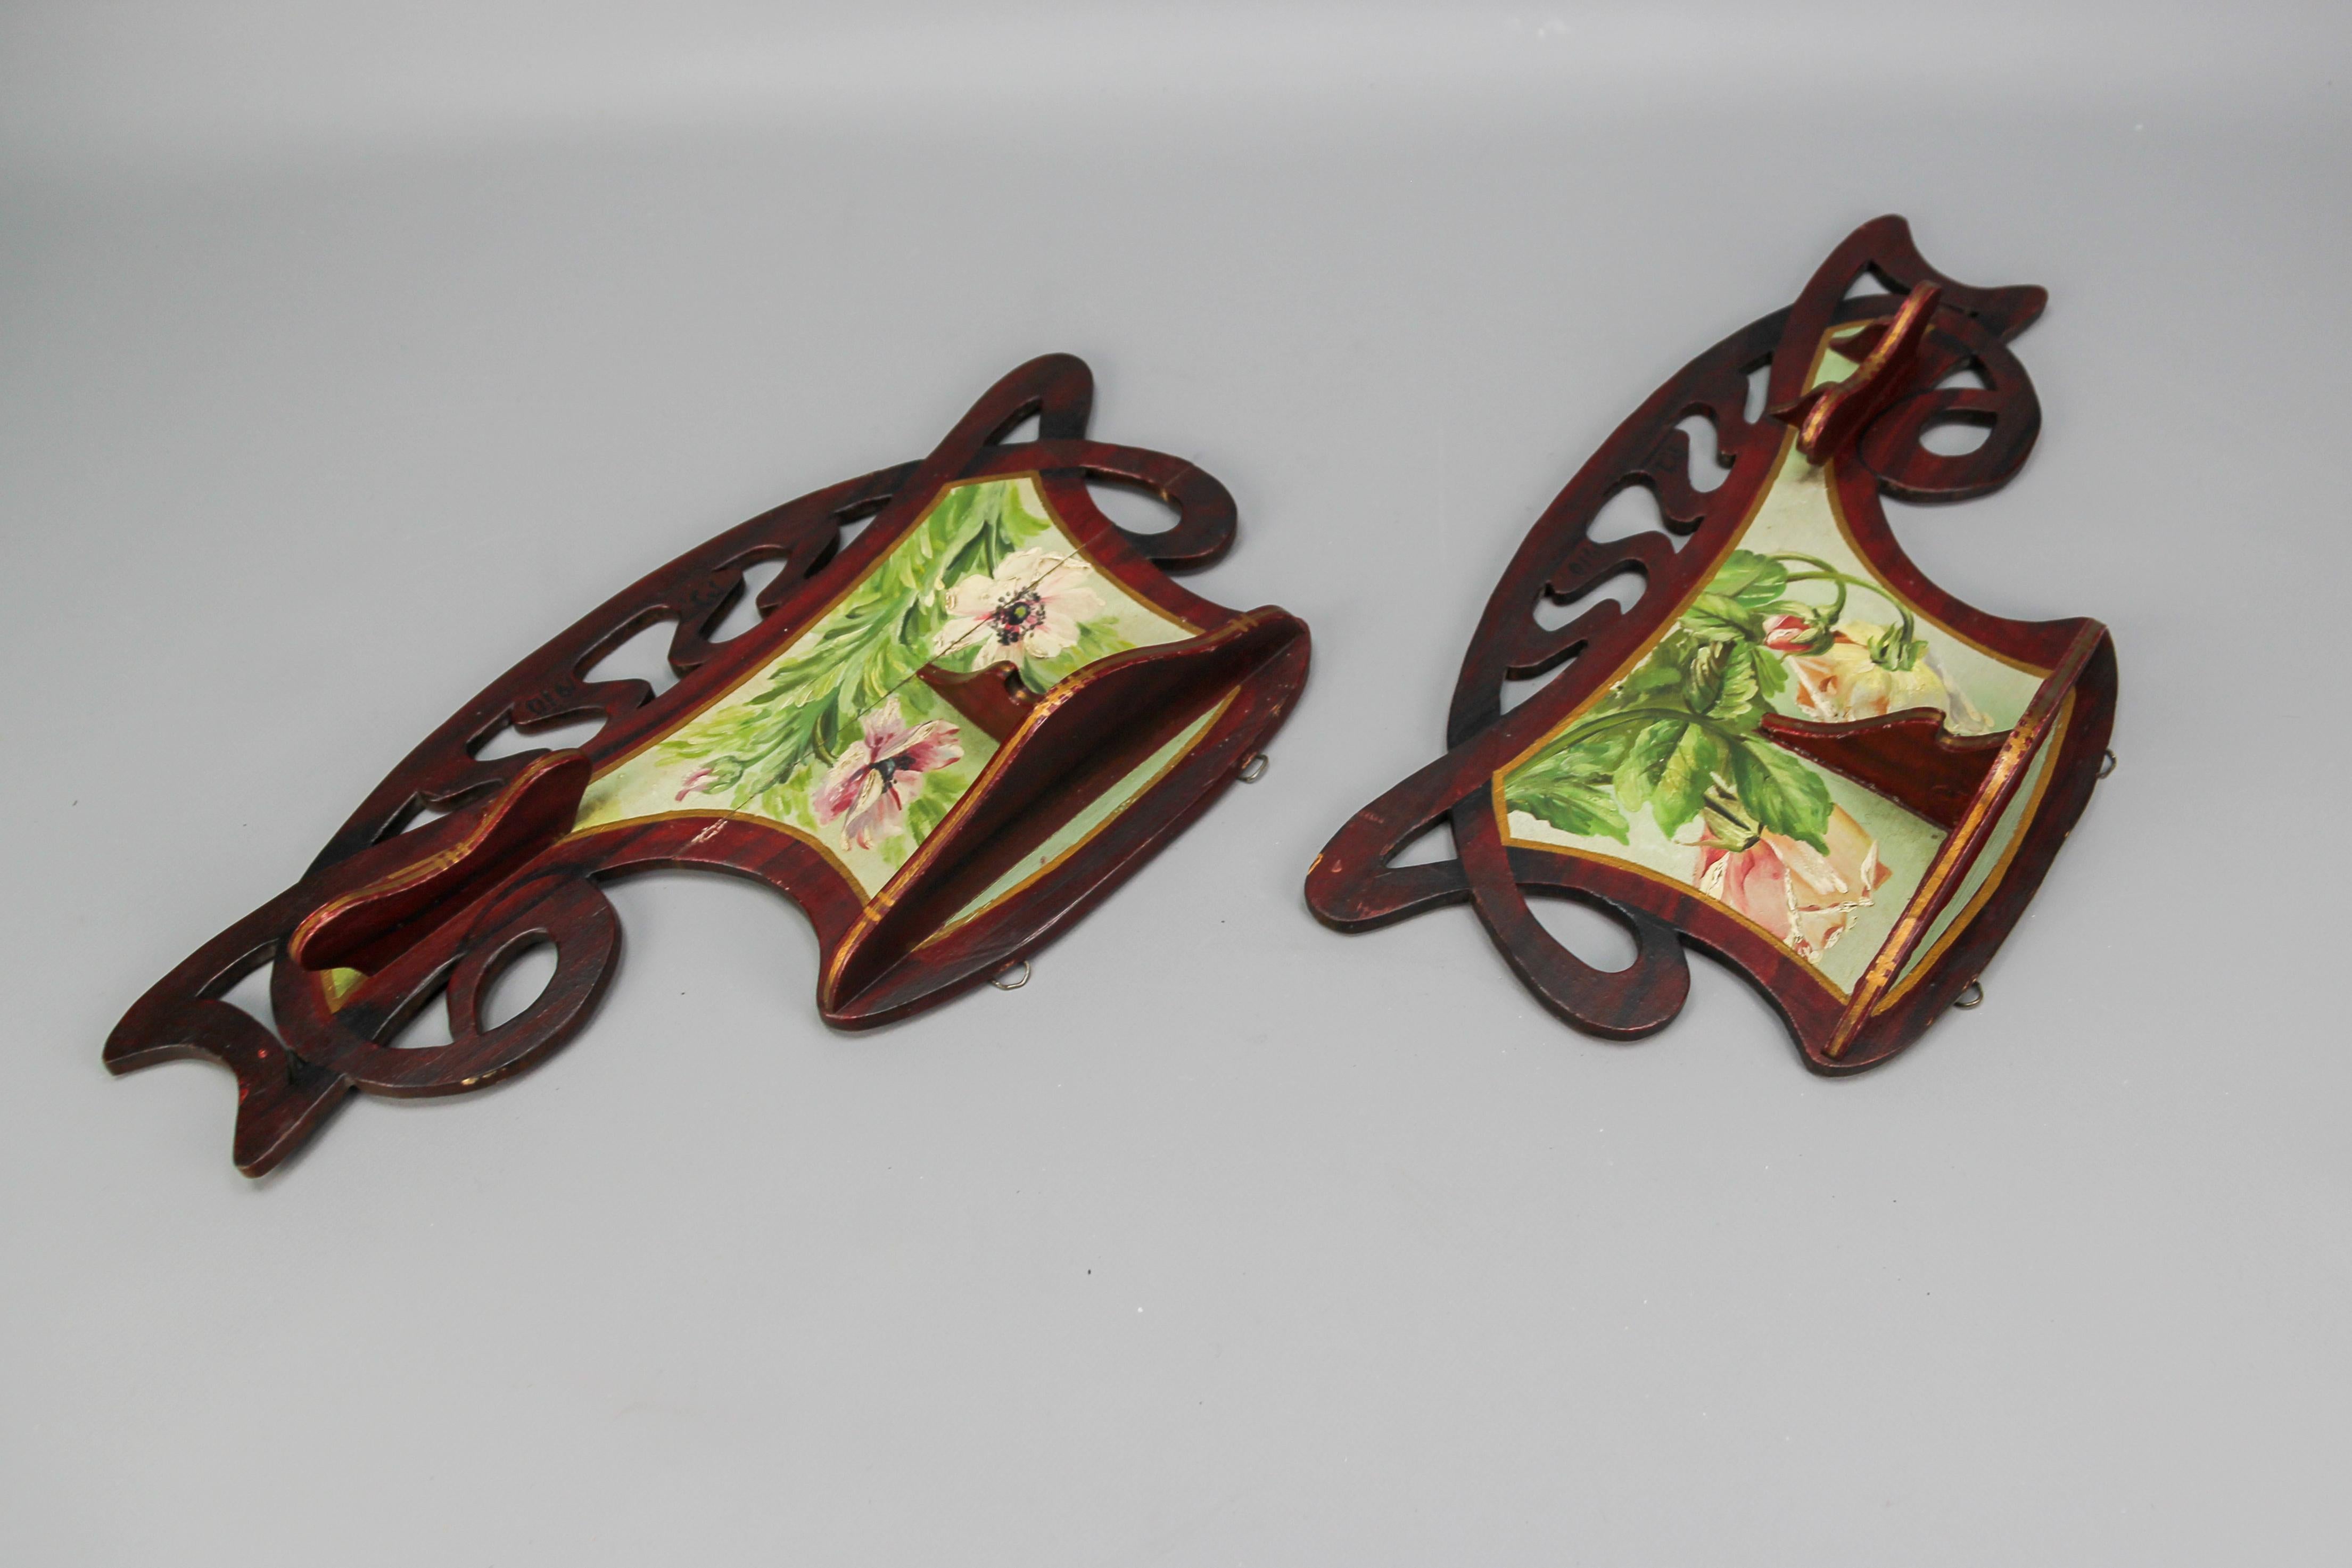 Pair of Art Nouveau Wooden Hand-Painted Floral Shelves, Germany, 1910 For Sale 3